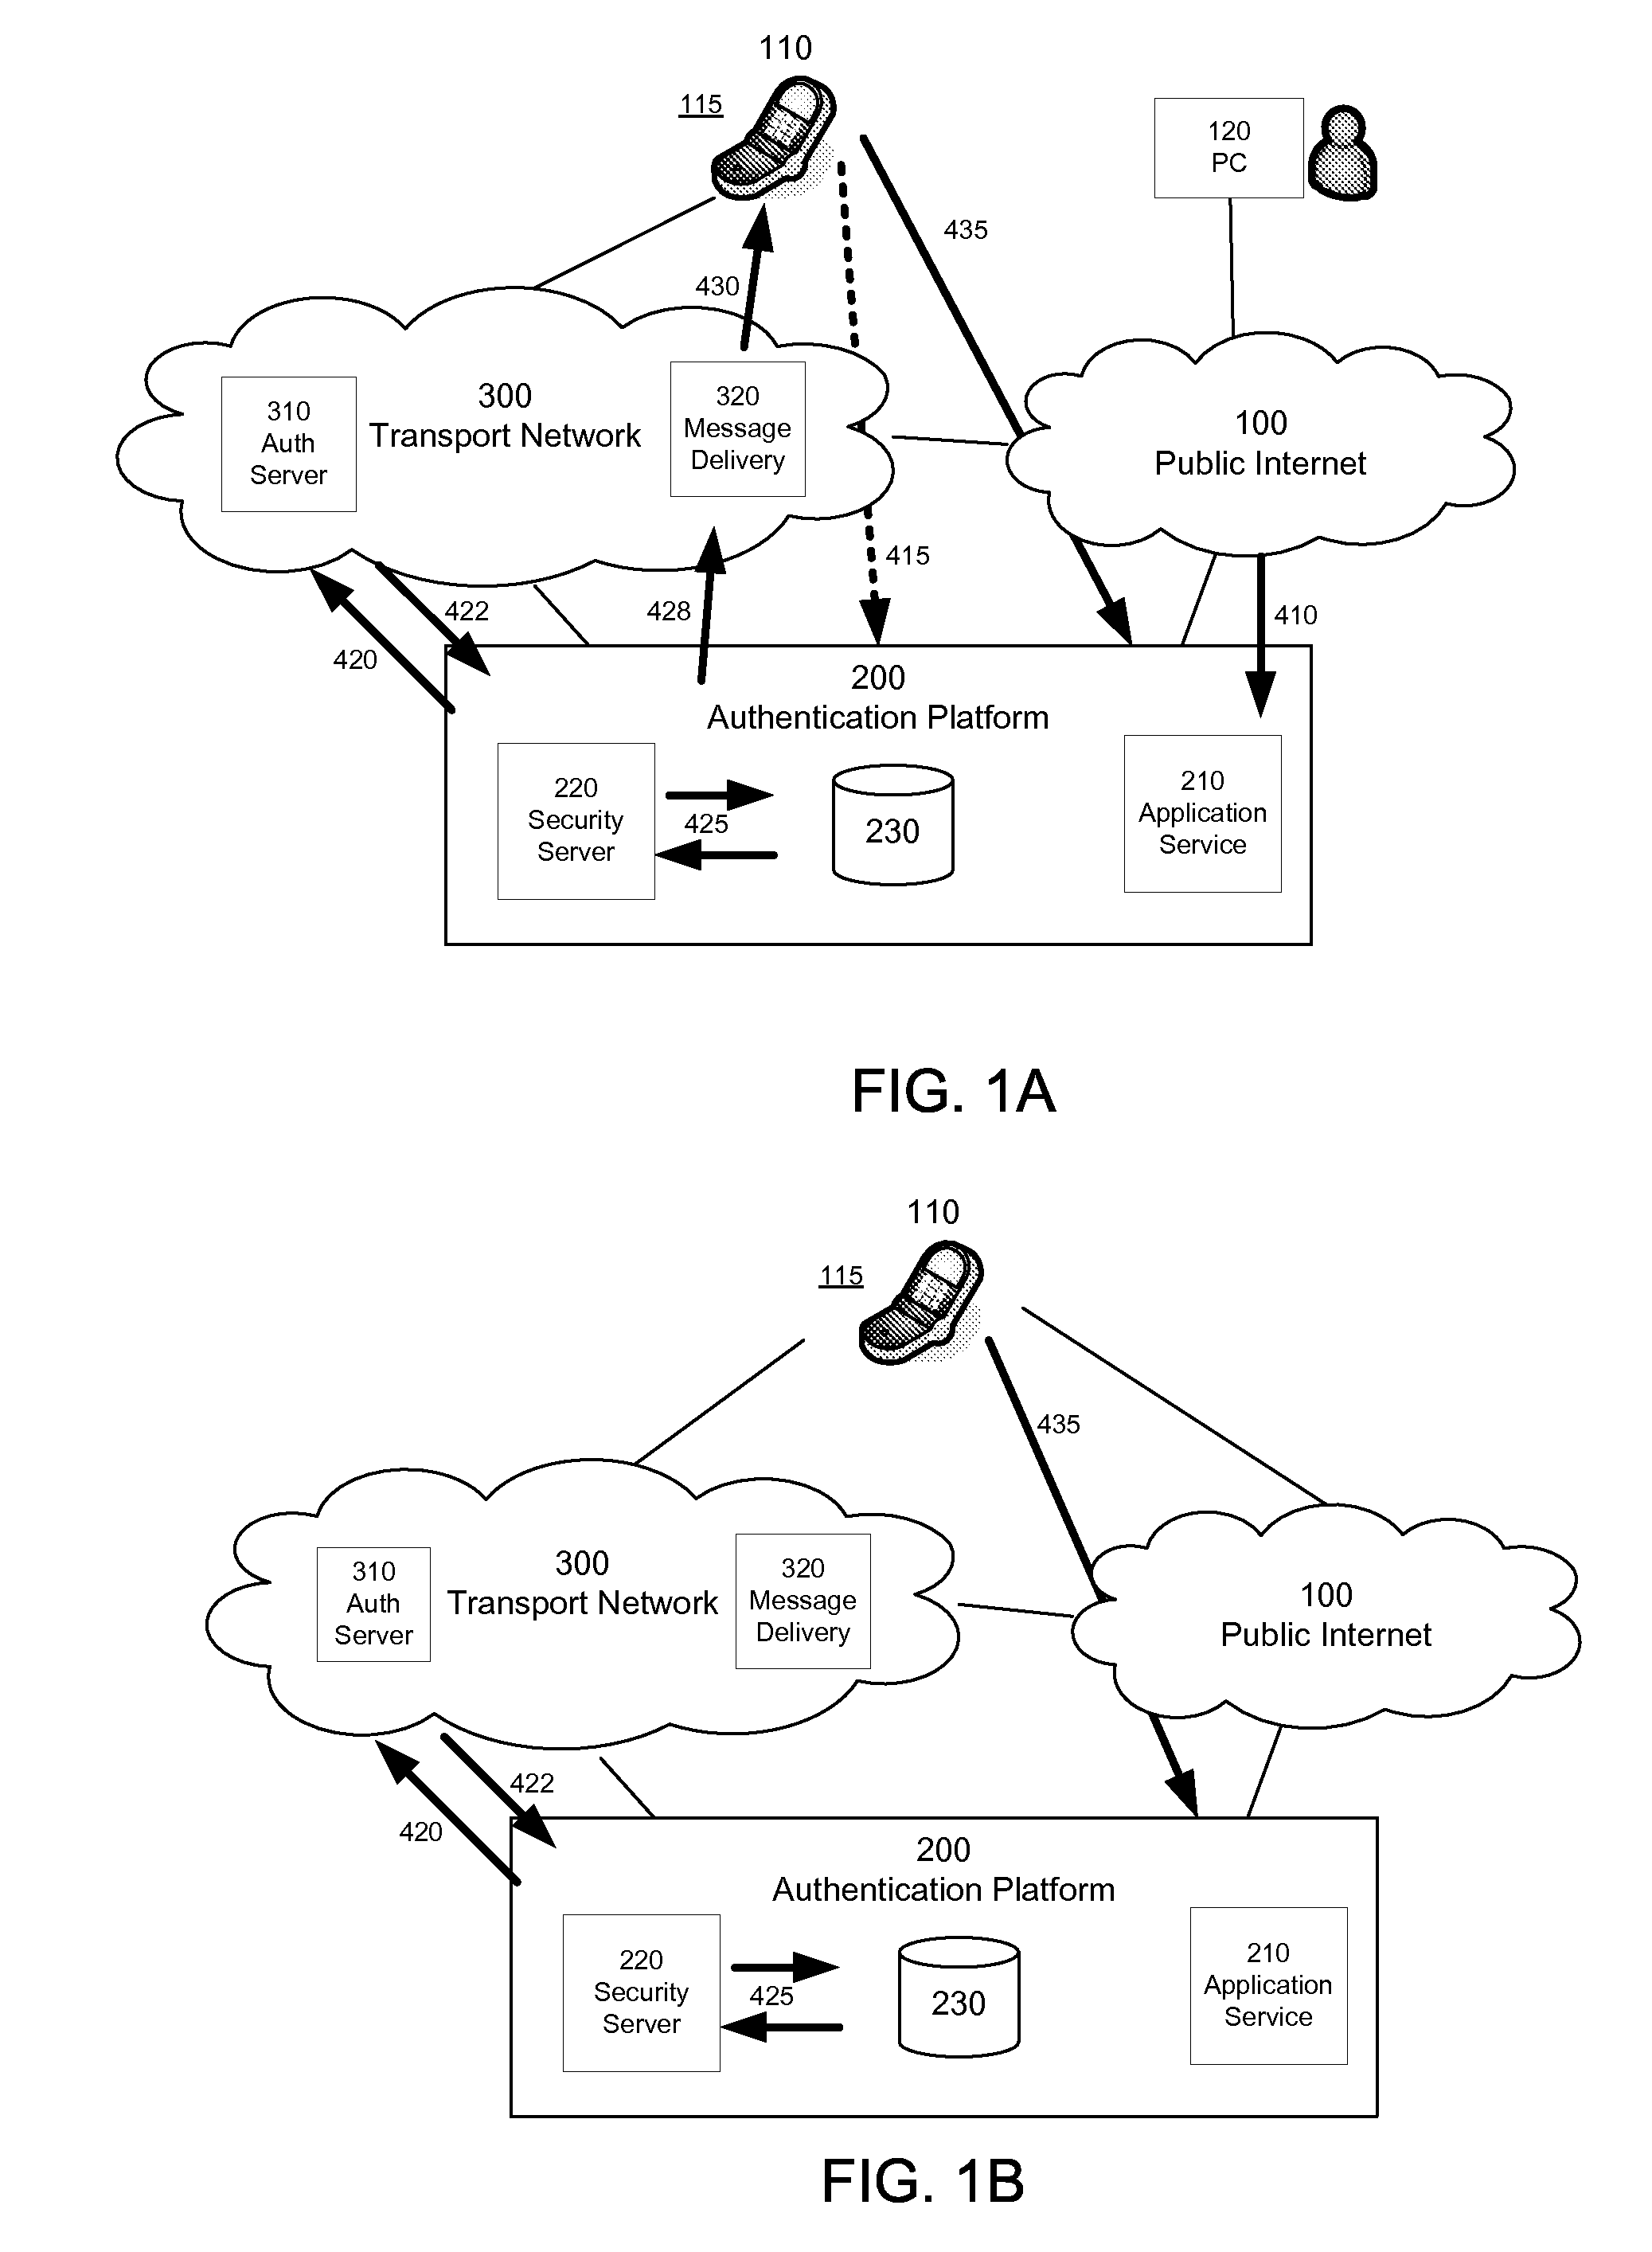 Automated Authentication Process for Application Clients